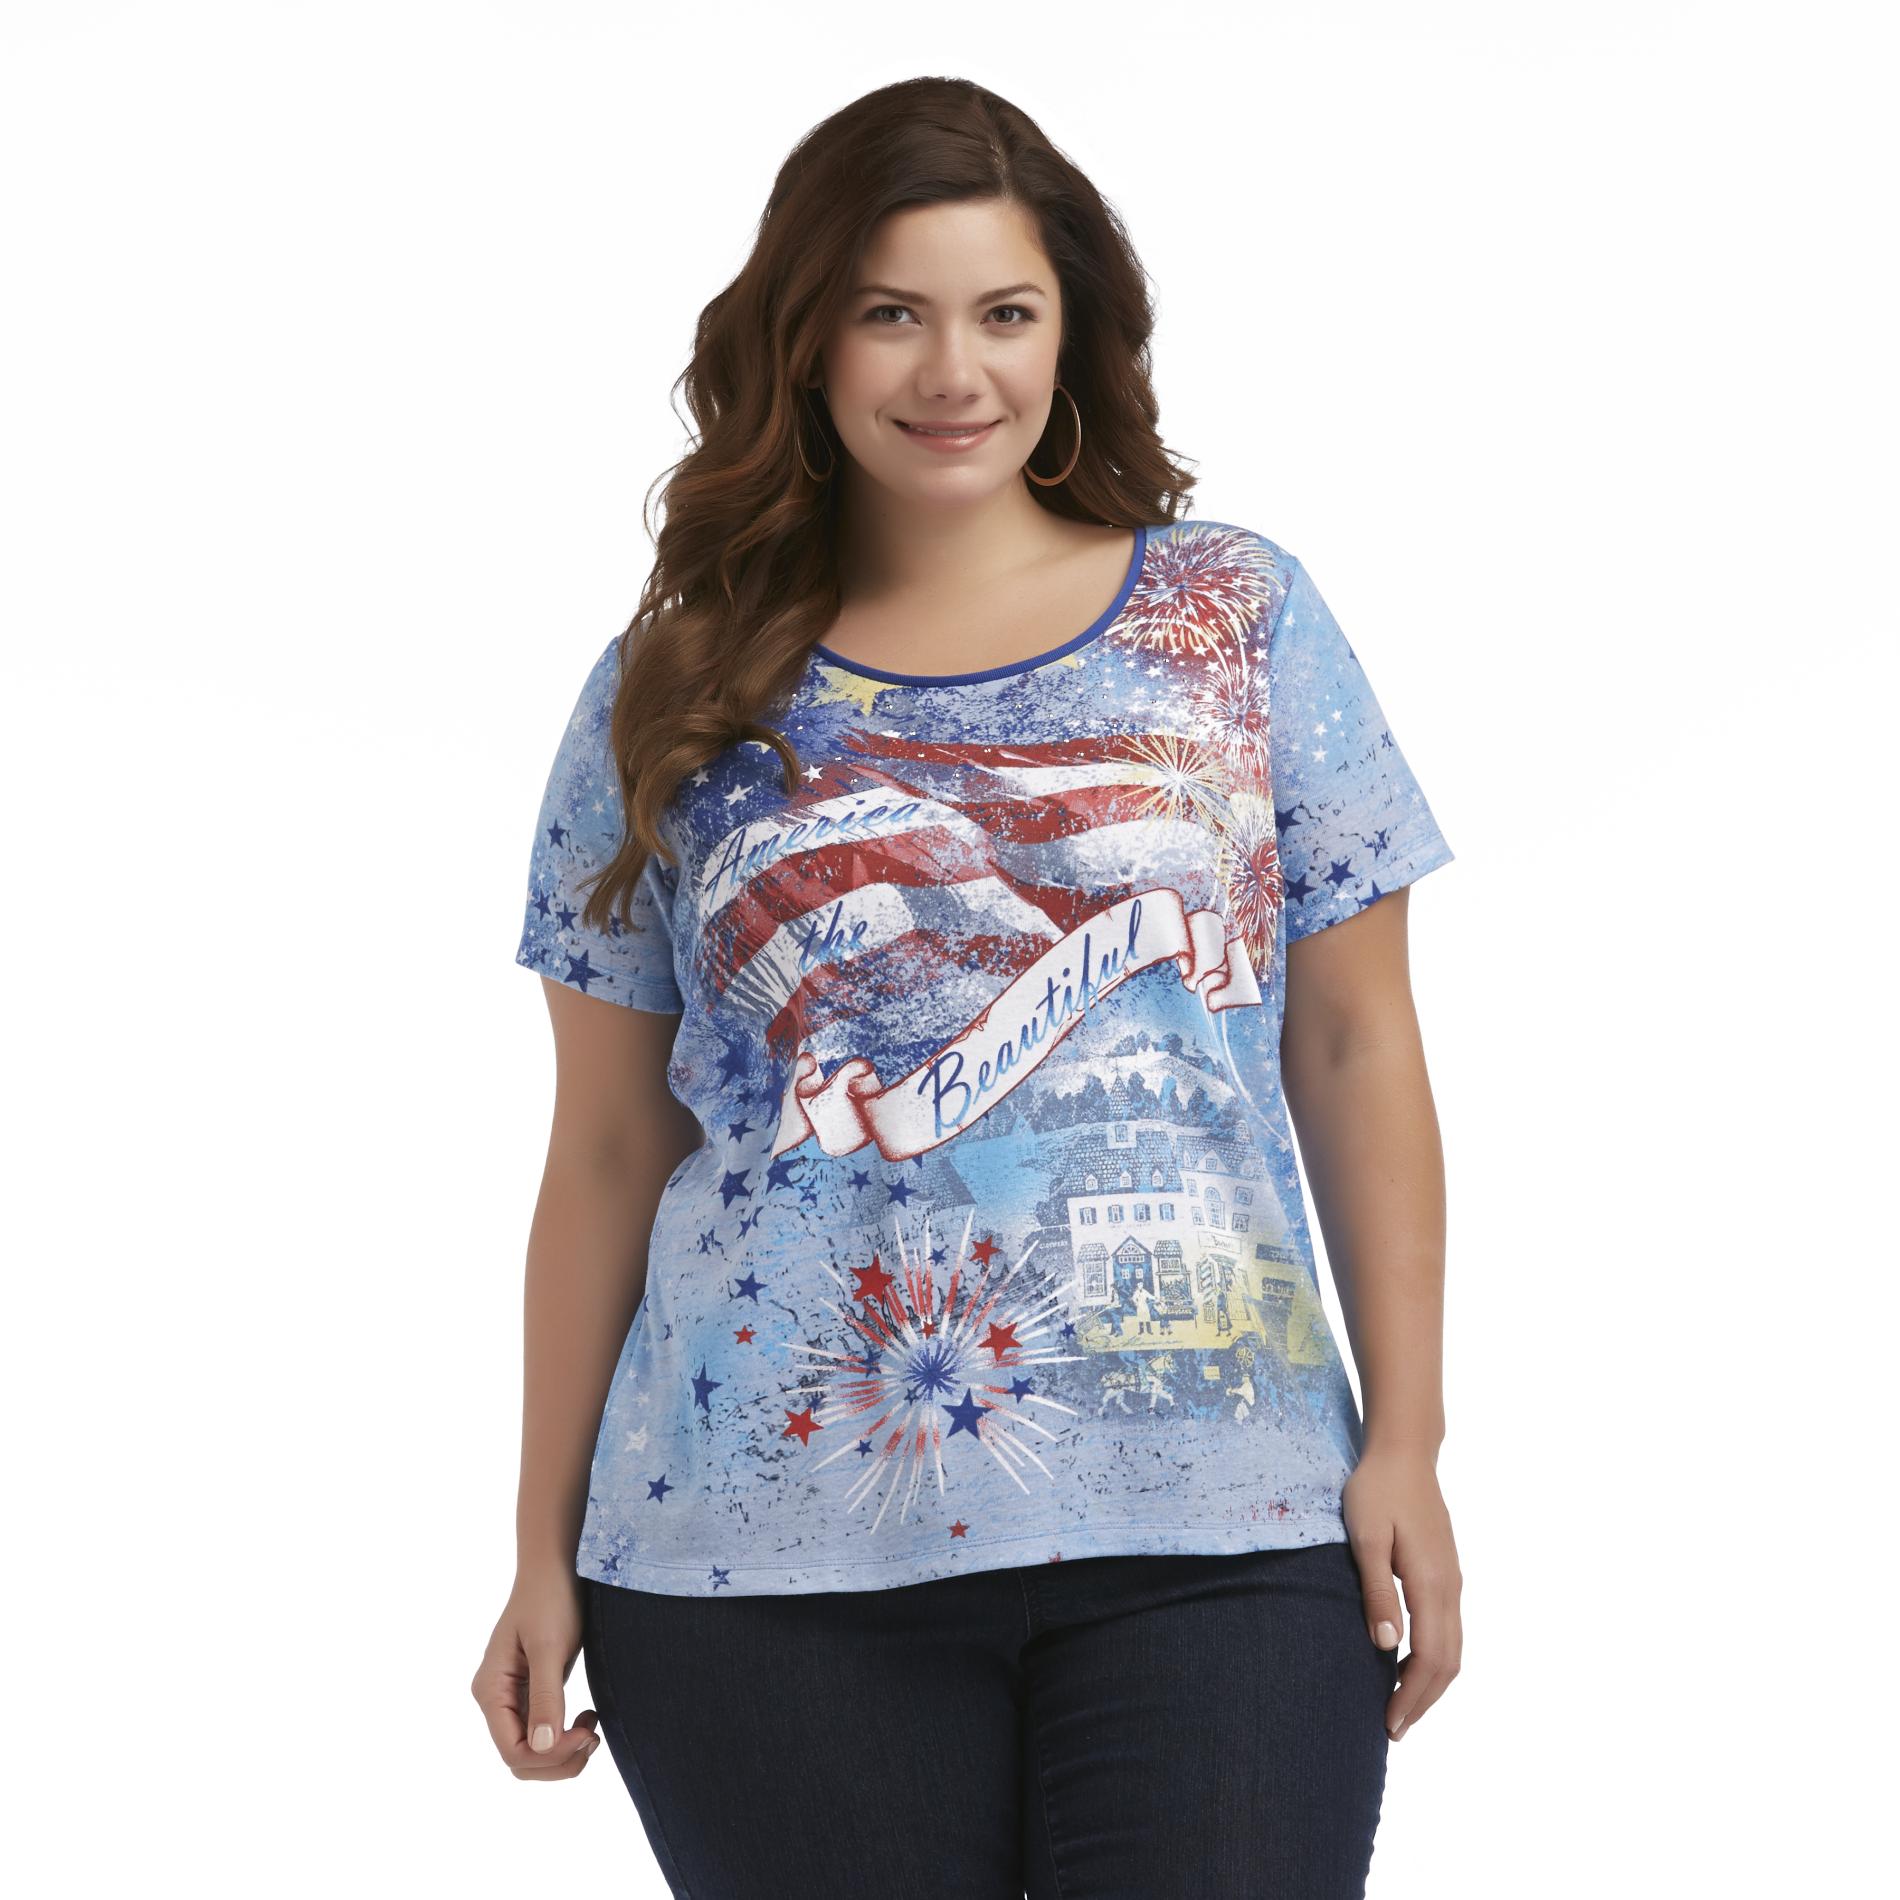 Holiday Editions Women's Plus Graphic Top - Fireworks